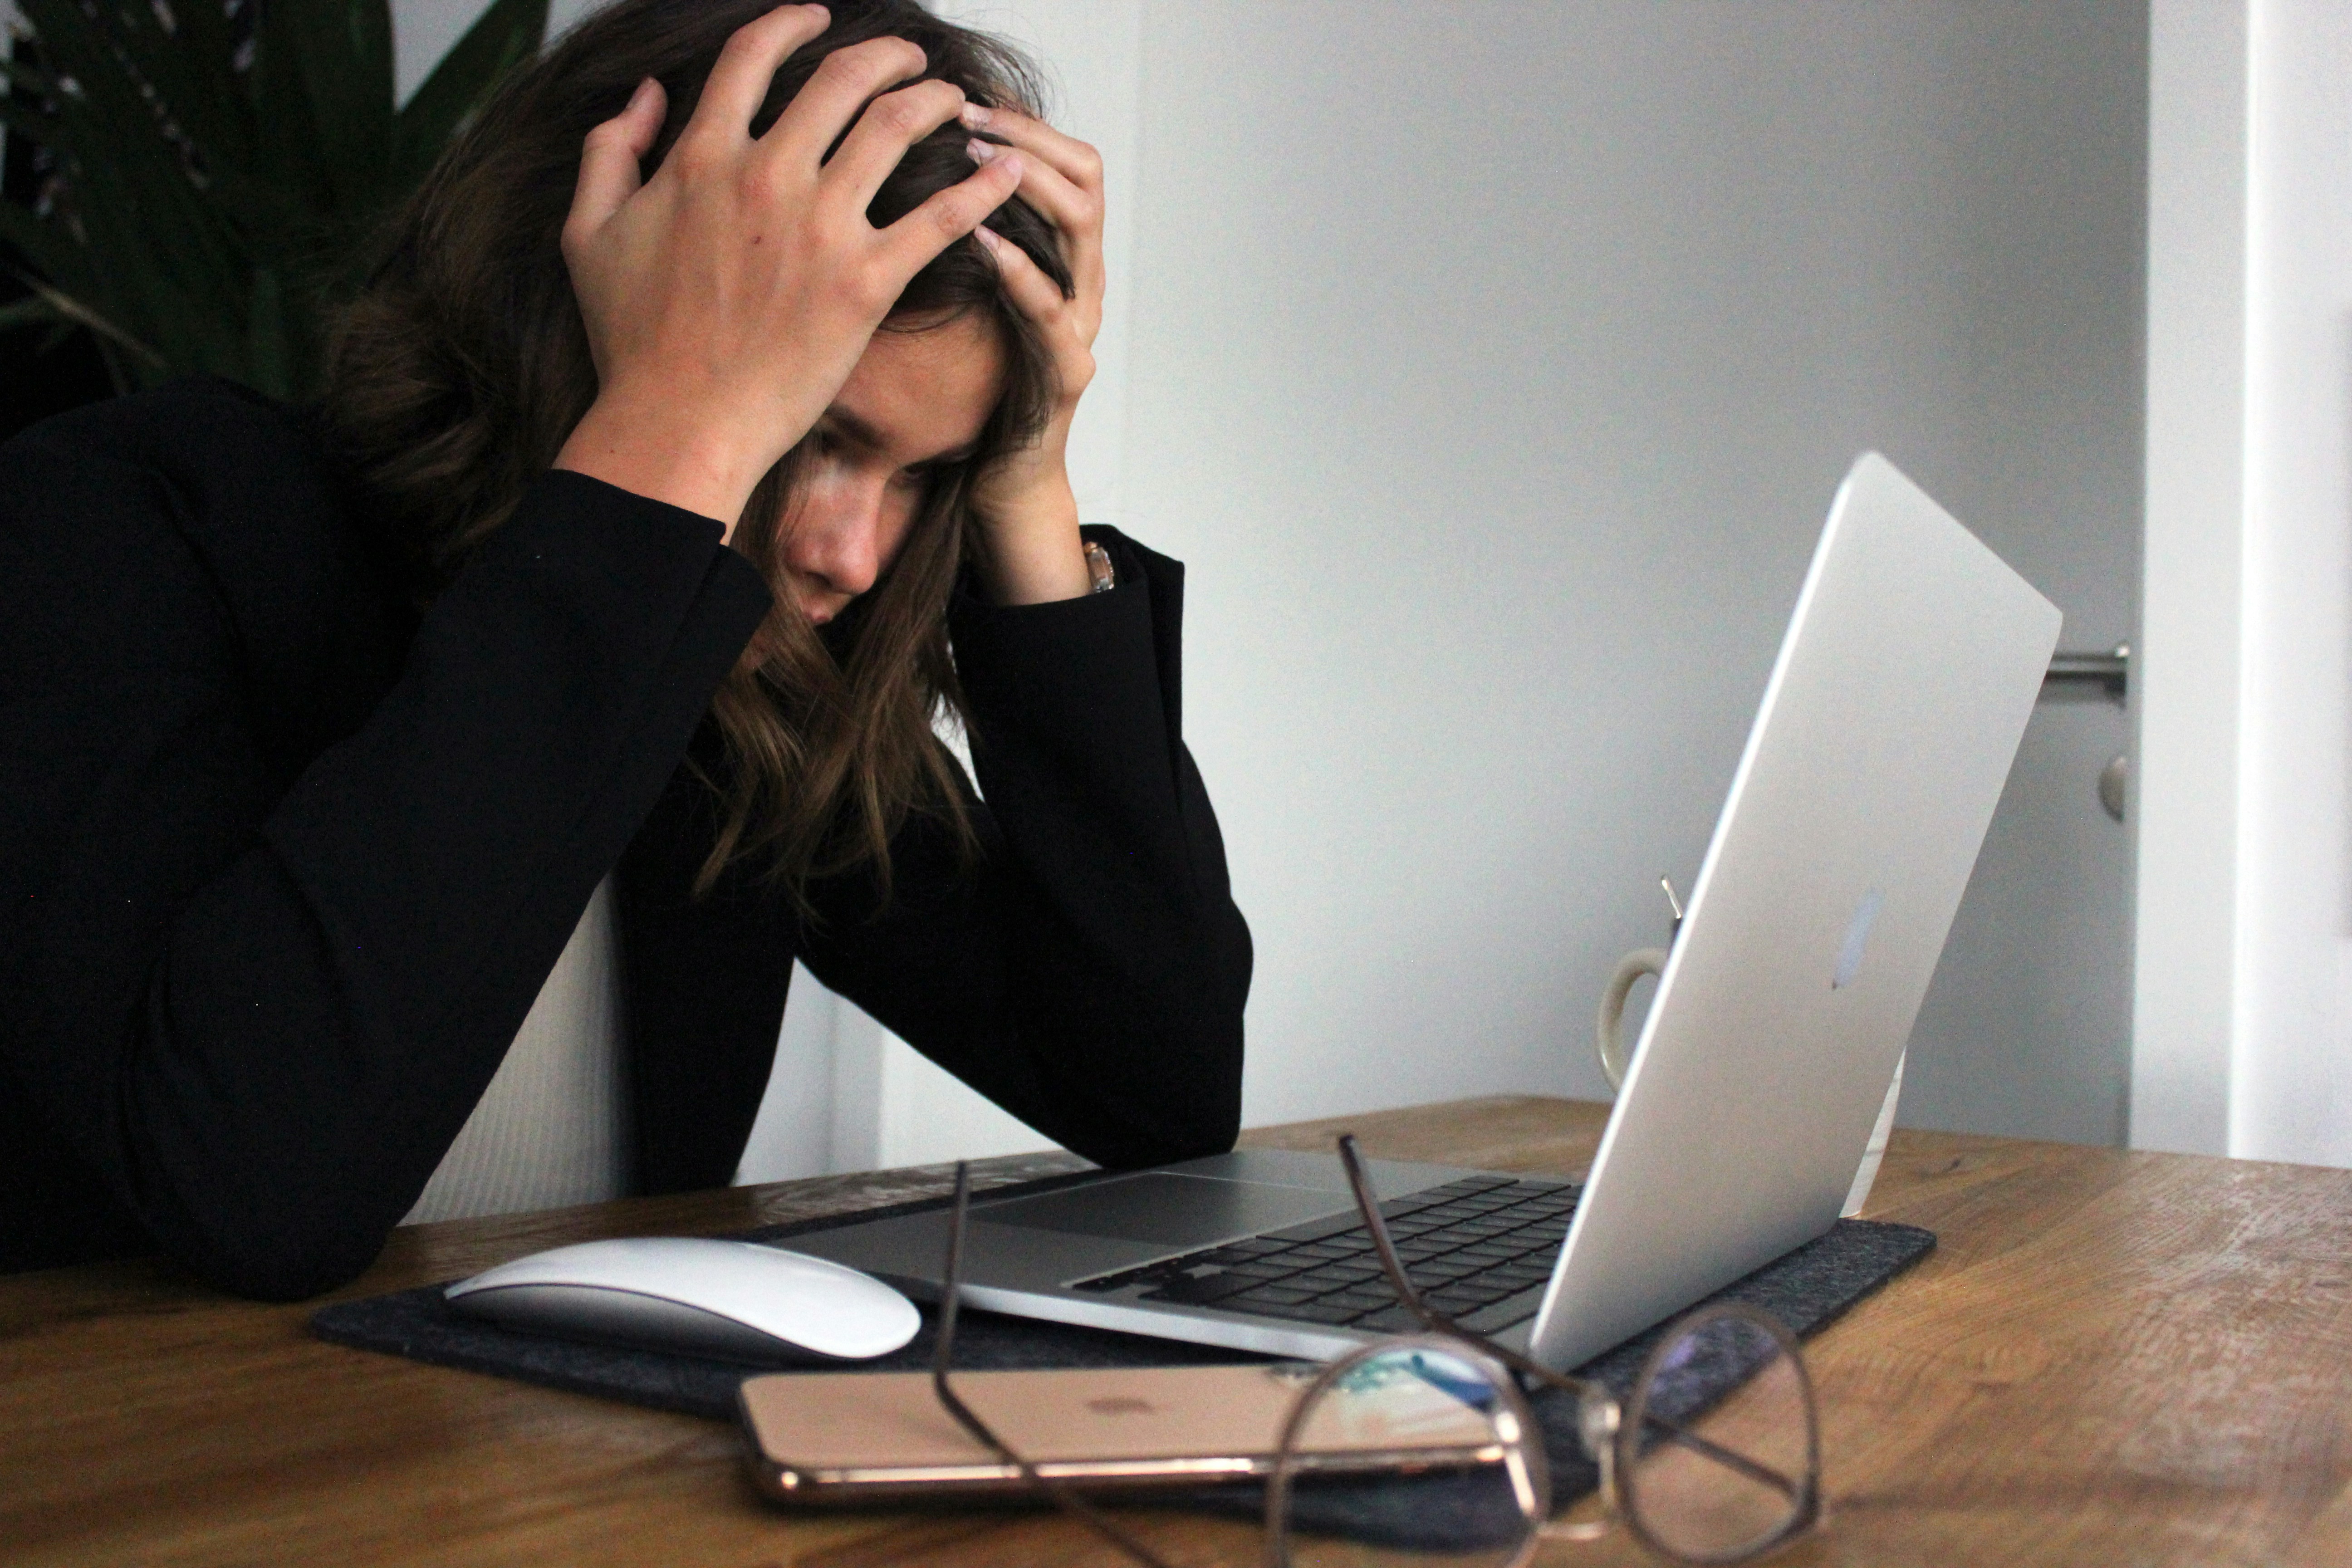 A women stress about her work and the cortisol increasing